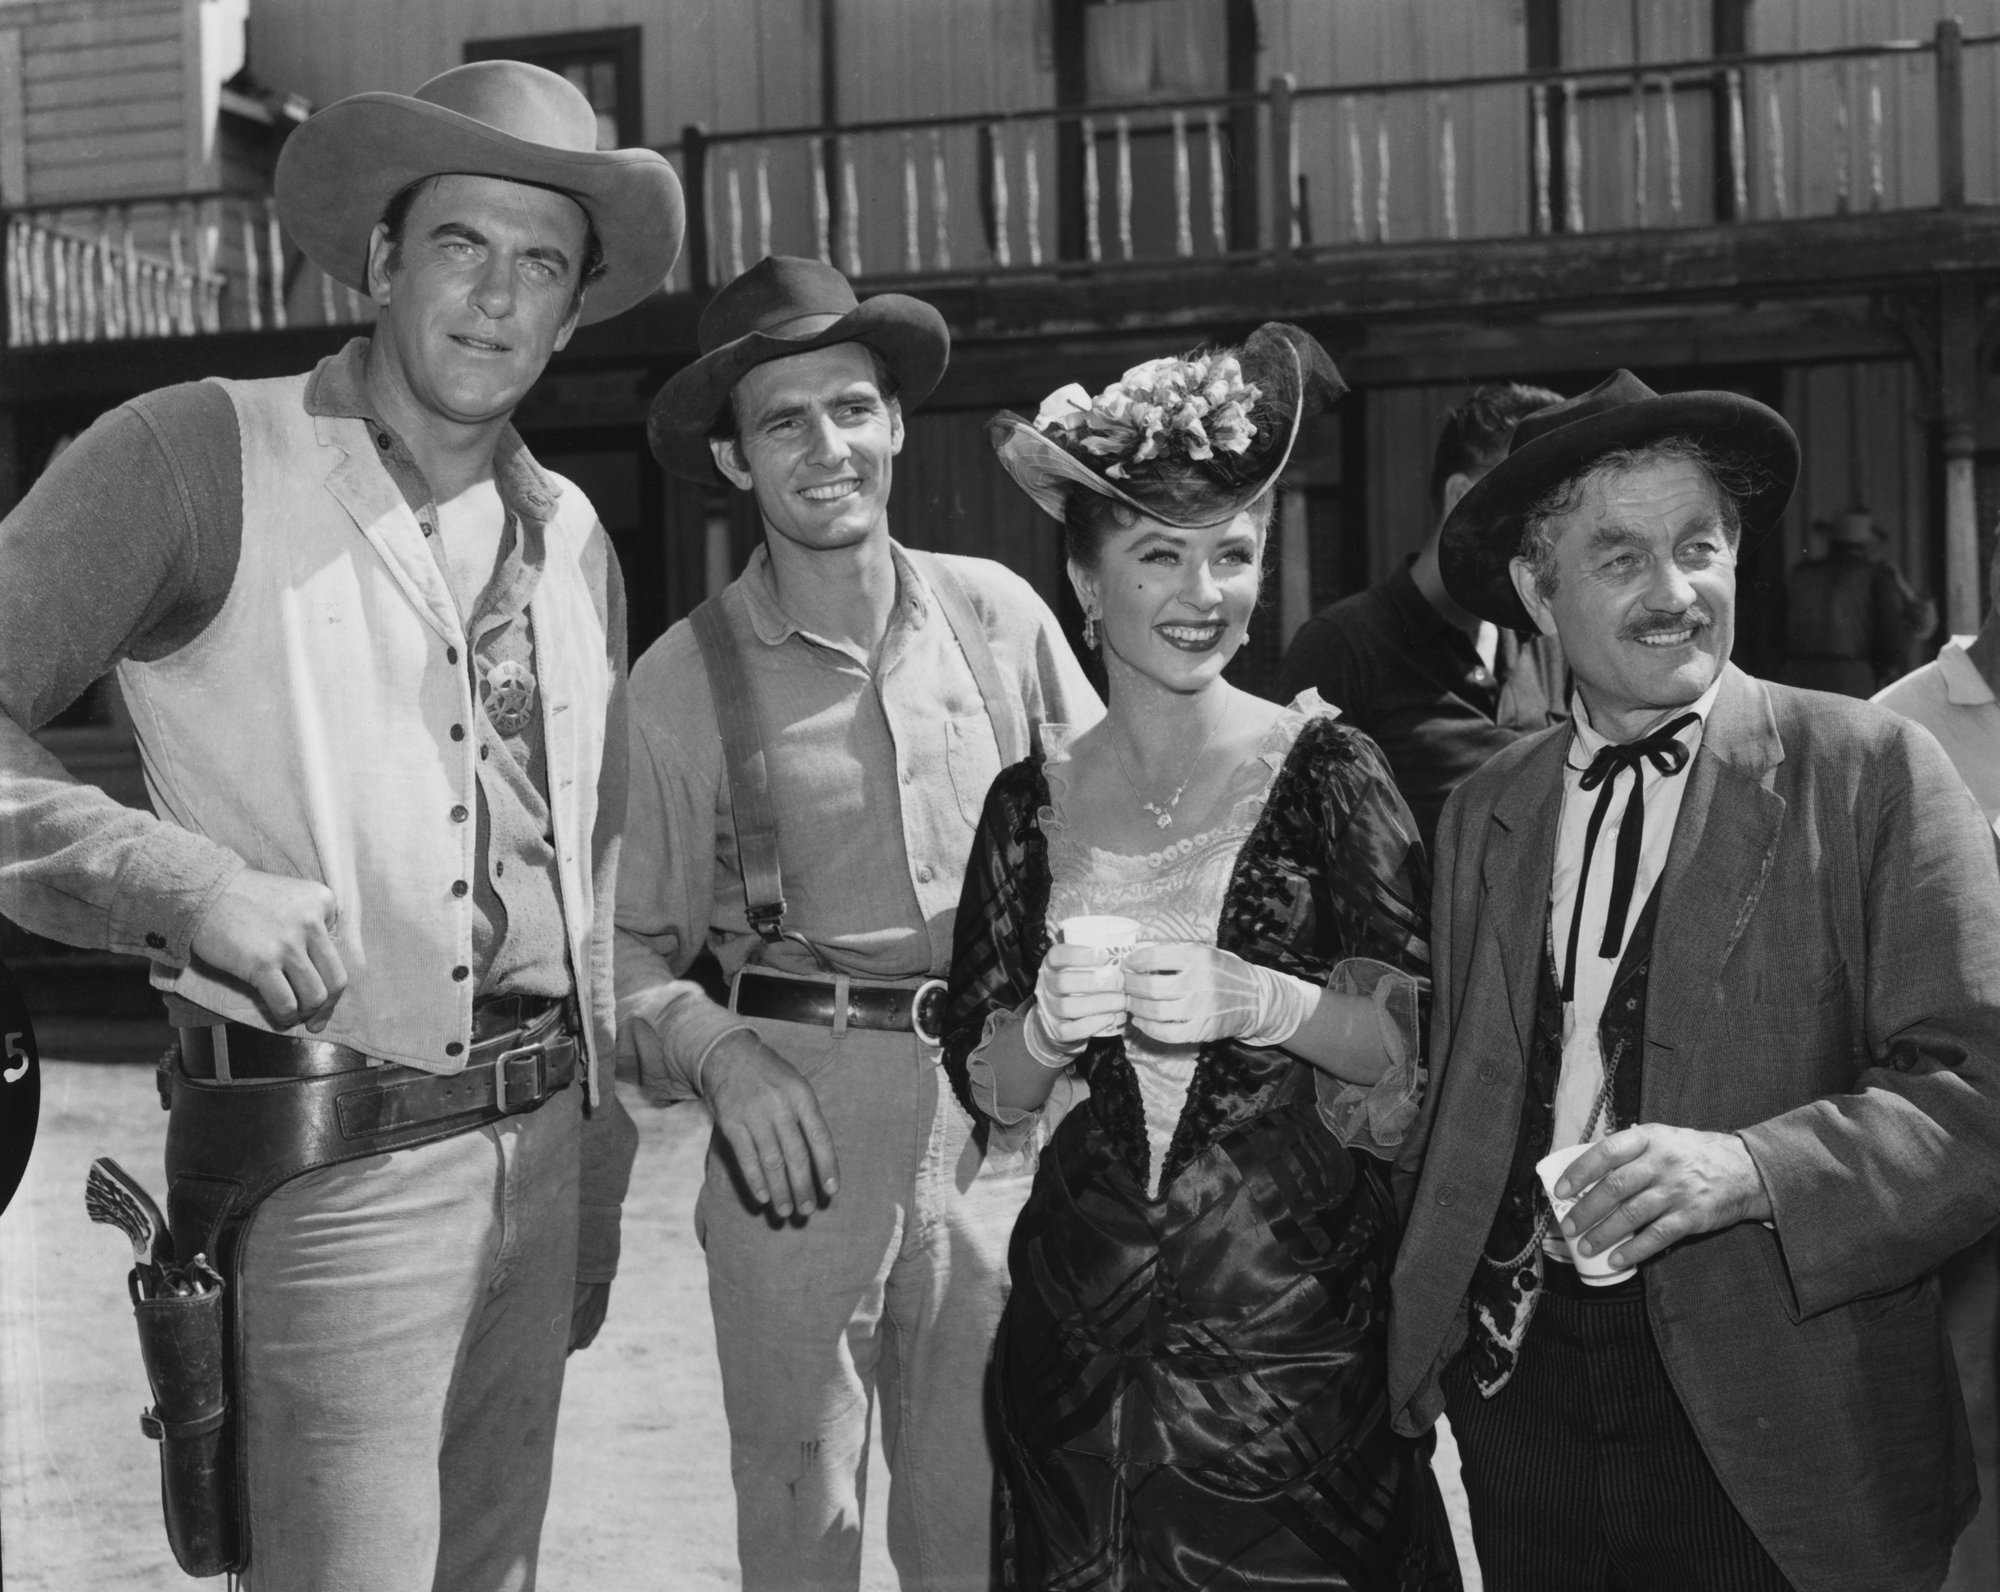 'Gunsmoke' James Arness as Marshal Matt Dillon, Dennis Weaver as Chester Goode, Amanda Blake as Kitty Russell, Milburn Stone as Doc Adams in a black-and-white picture, smiling in Western costumes in front of the Dodge City set